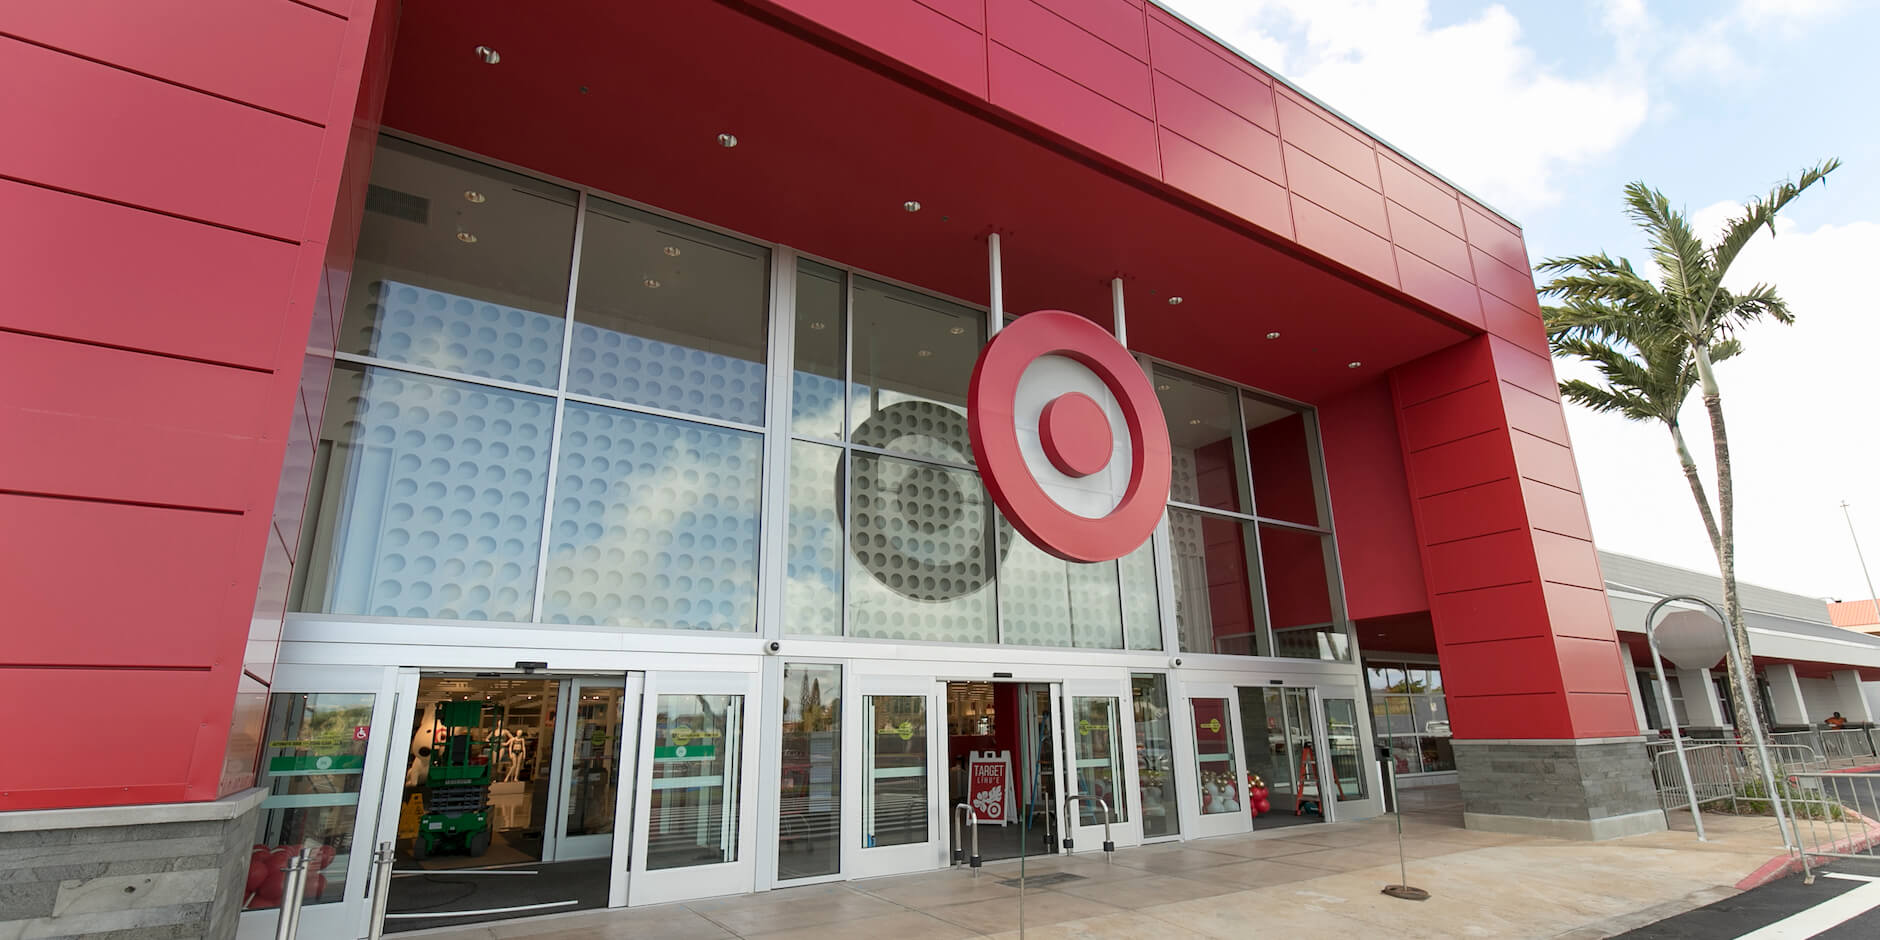 "The entrance to a Target store with a large red bullseye logo above the doors."